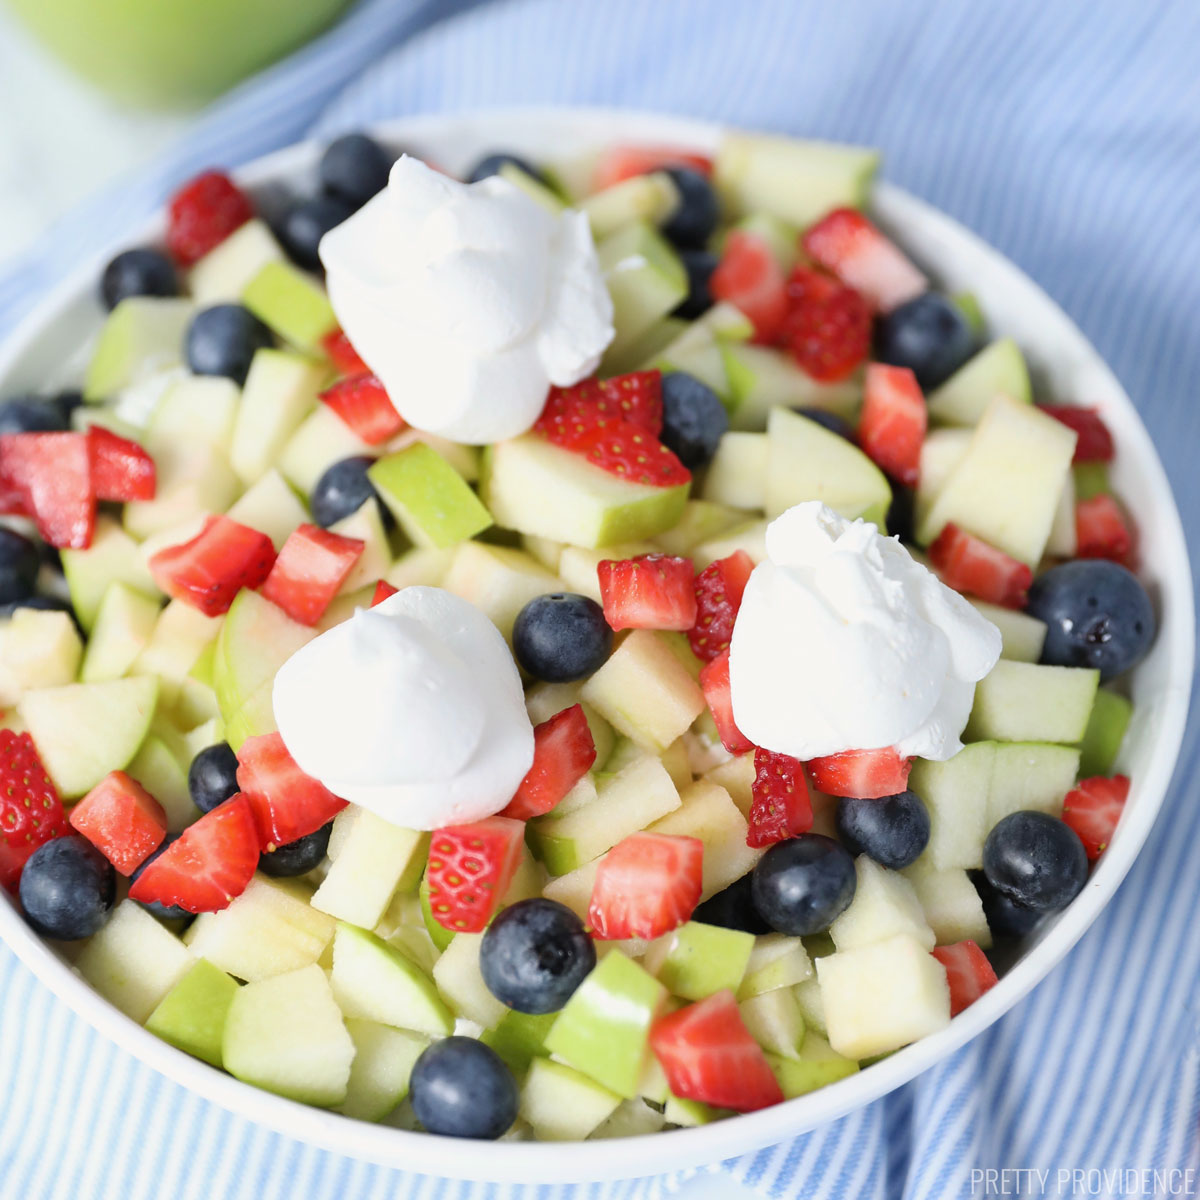 Fruit Salad made of granny smith apples, blueberries, strawberries with dollops of cool whip on top